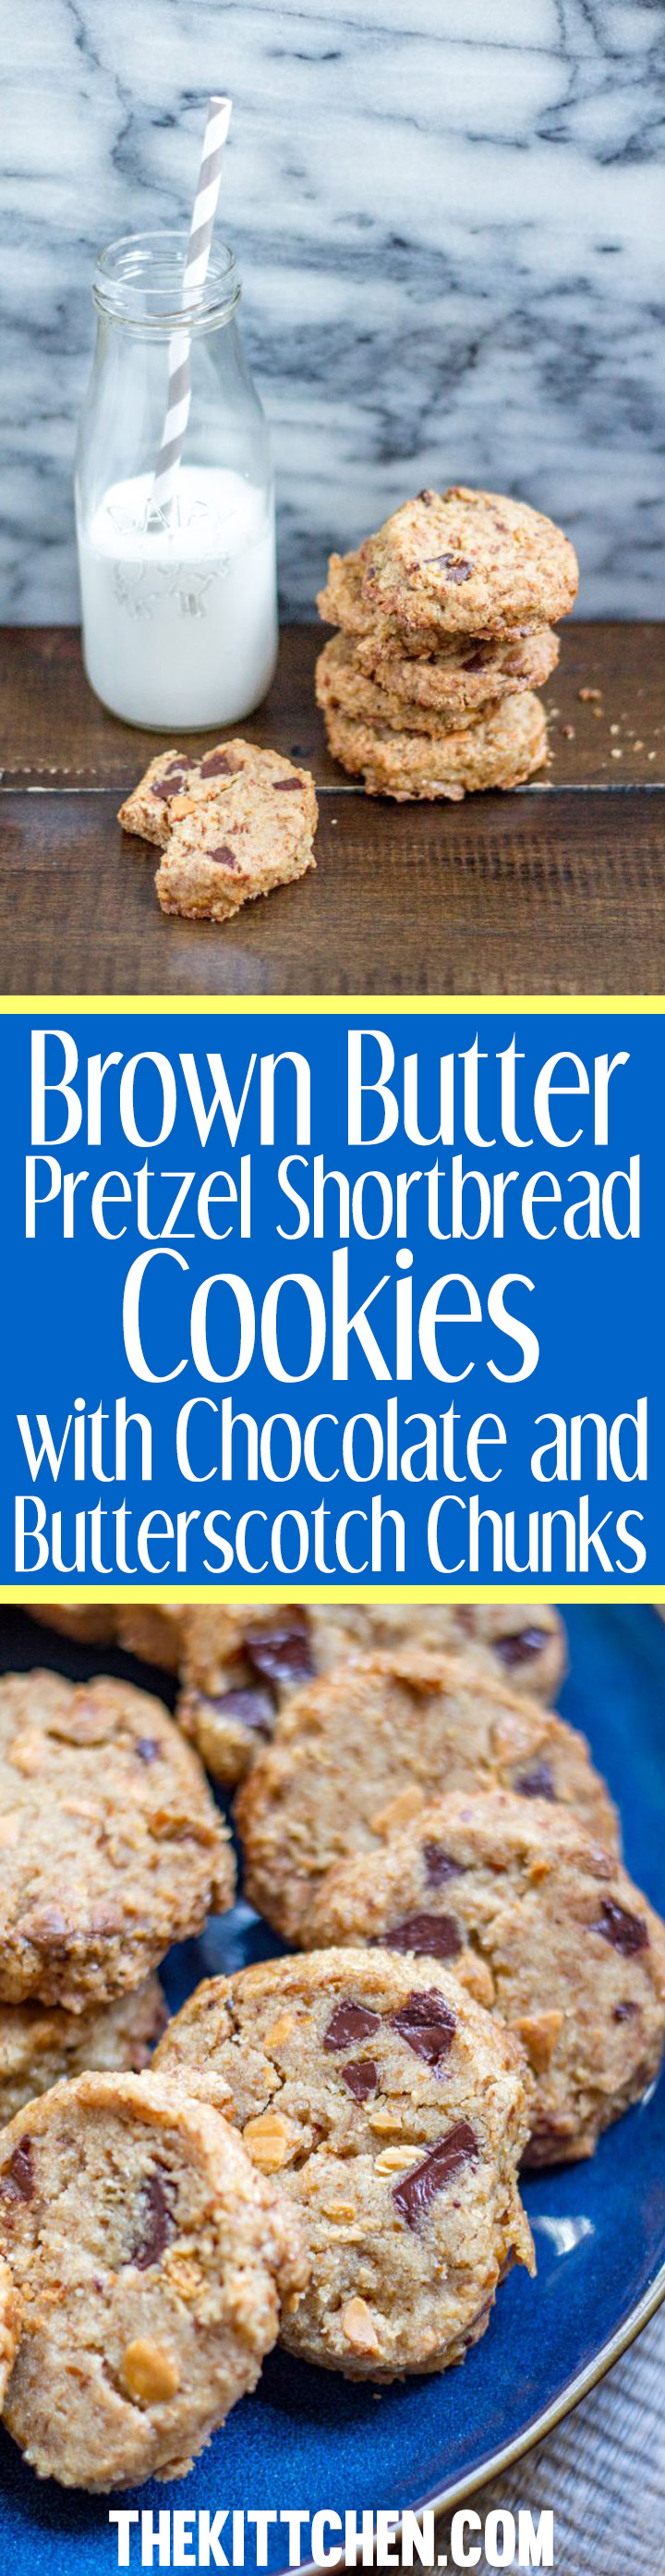 Brown Butter Pretzel Shortbread Cookies with Chocolate and Butterscotch Chunks